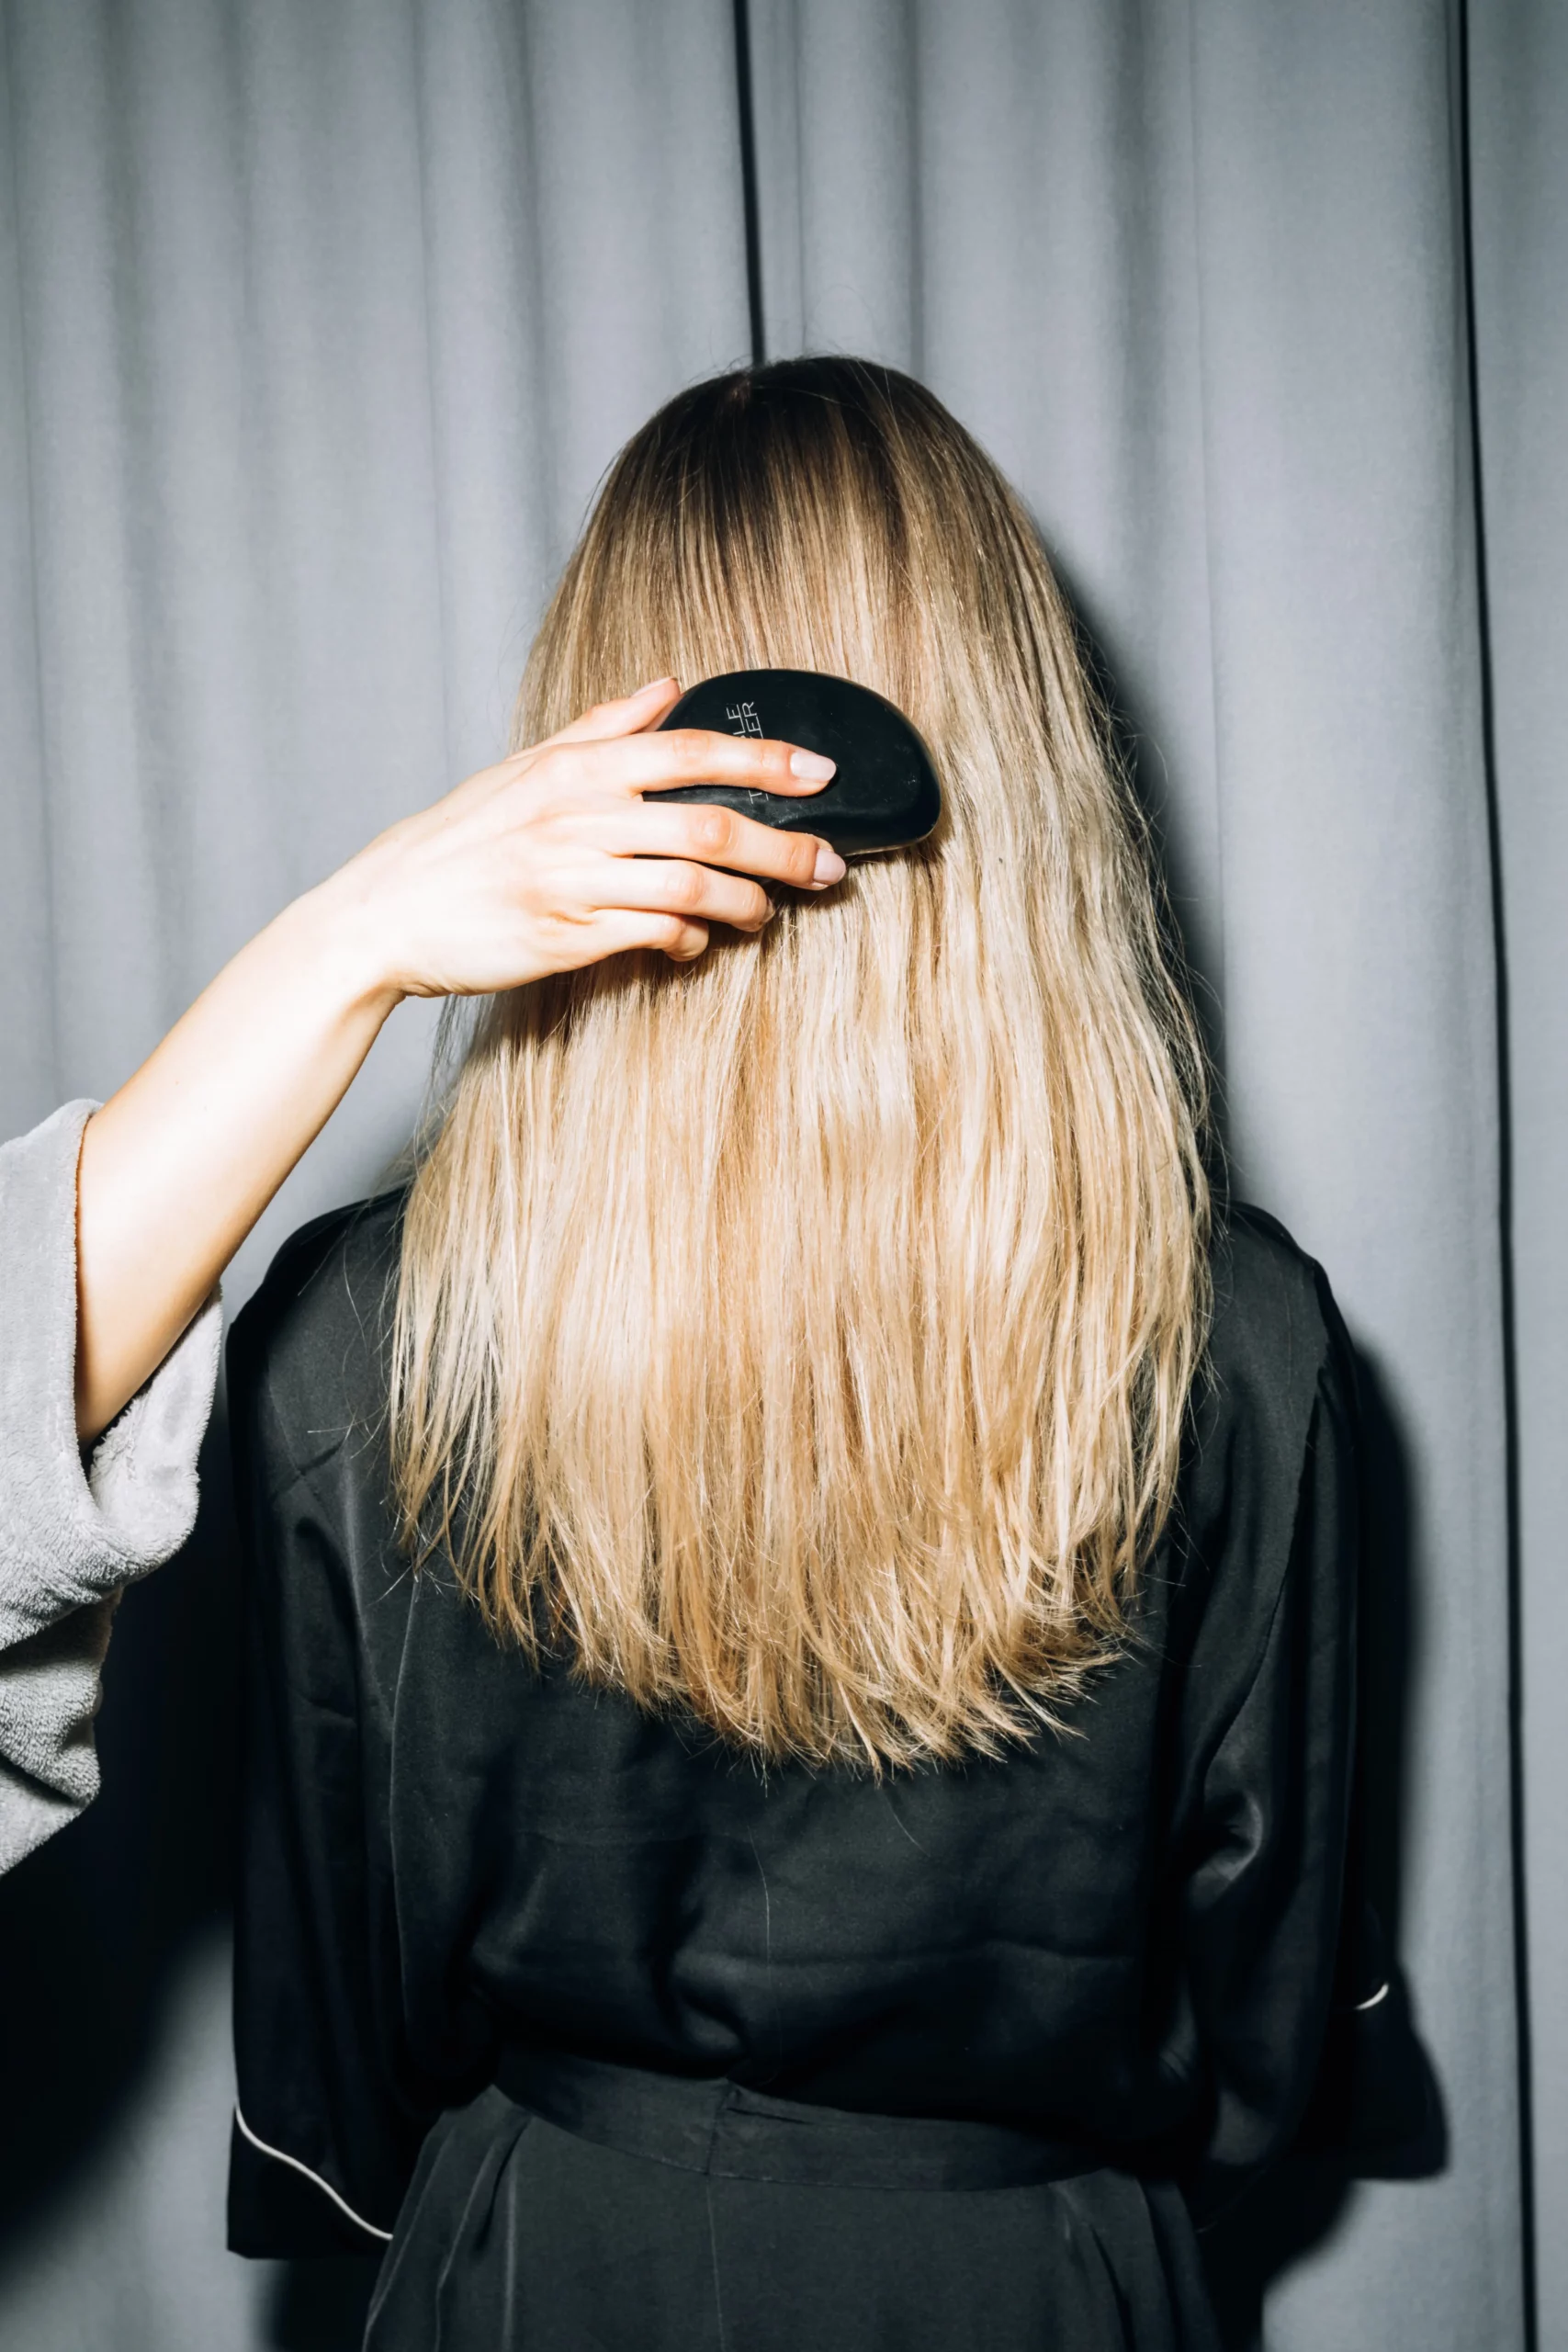 How To Add Volume To Hair: 11 Easy Ways | ClothedUp